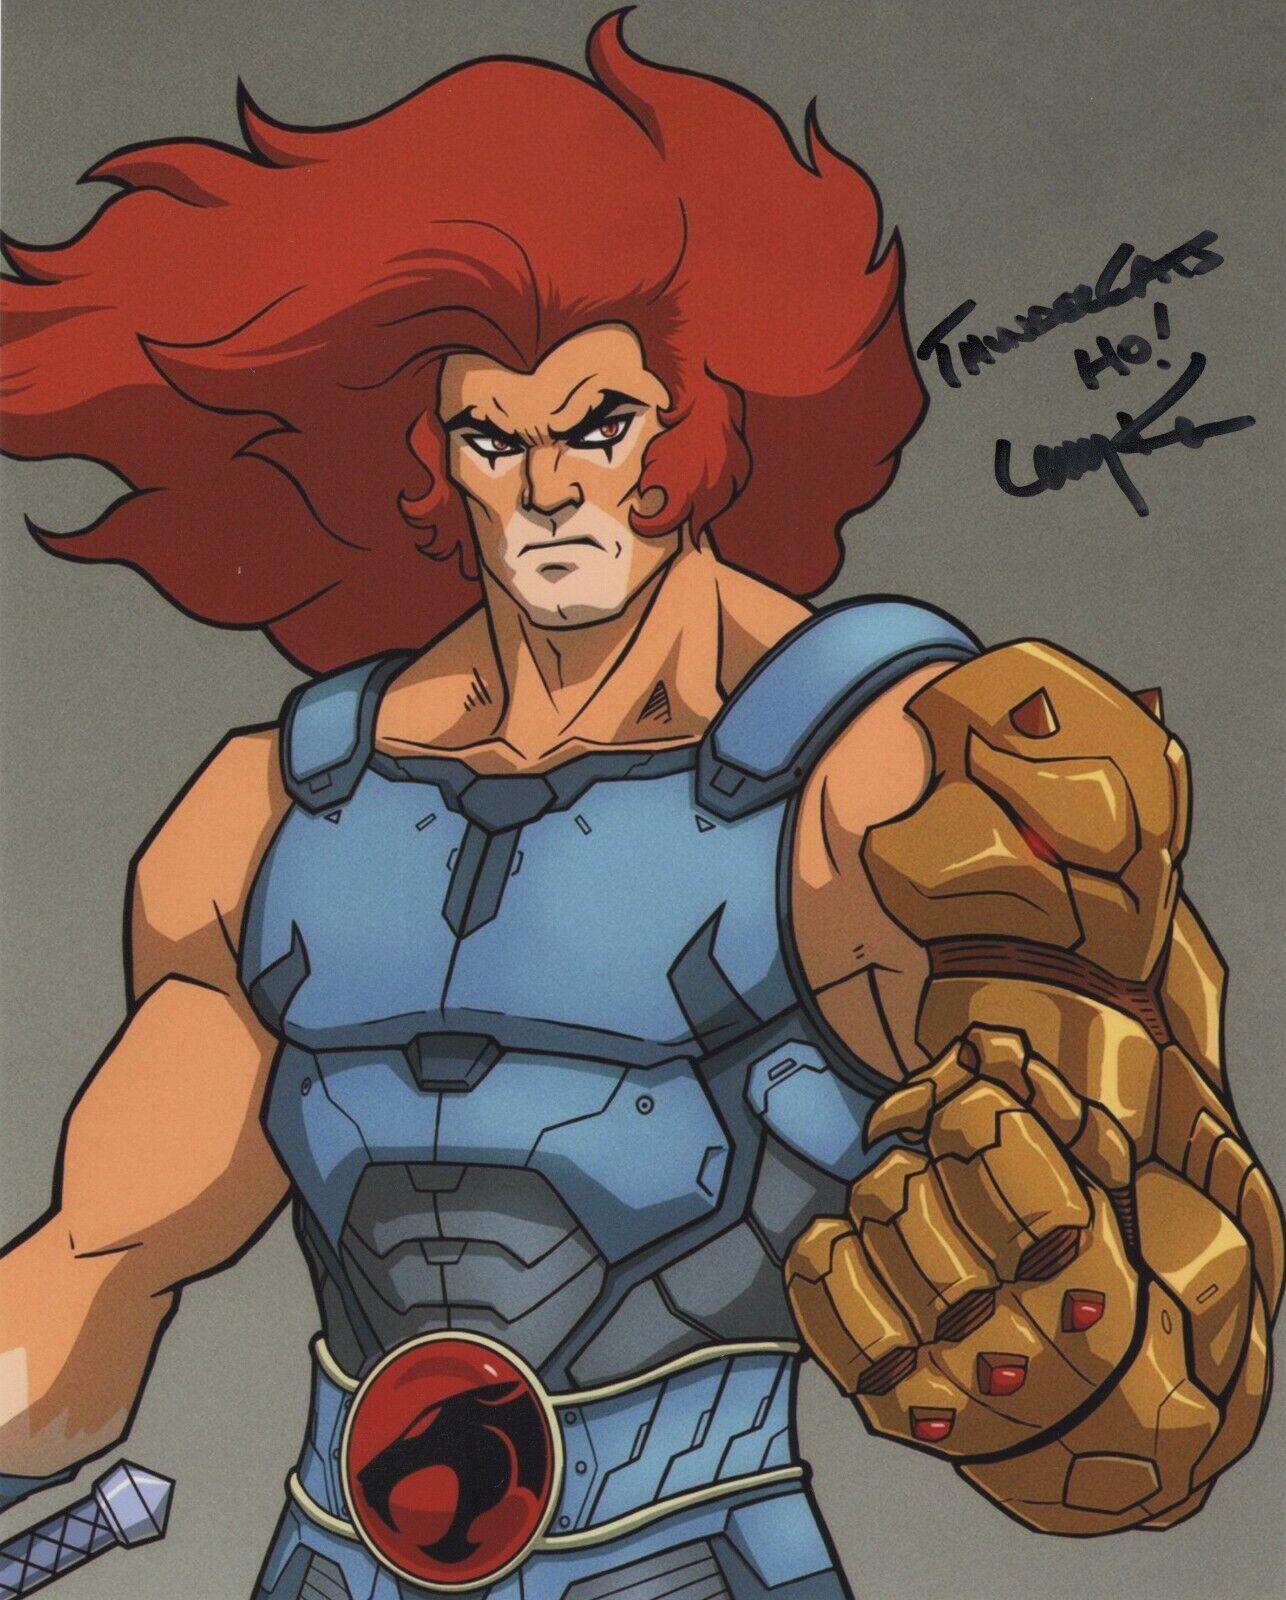 LARRY KENNEY SIGNED AUTOGRAPH THUNDERCATS LION-O 8X10 Photo Poster painting #3